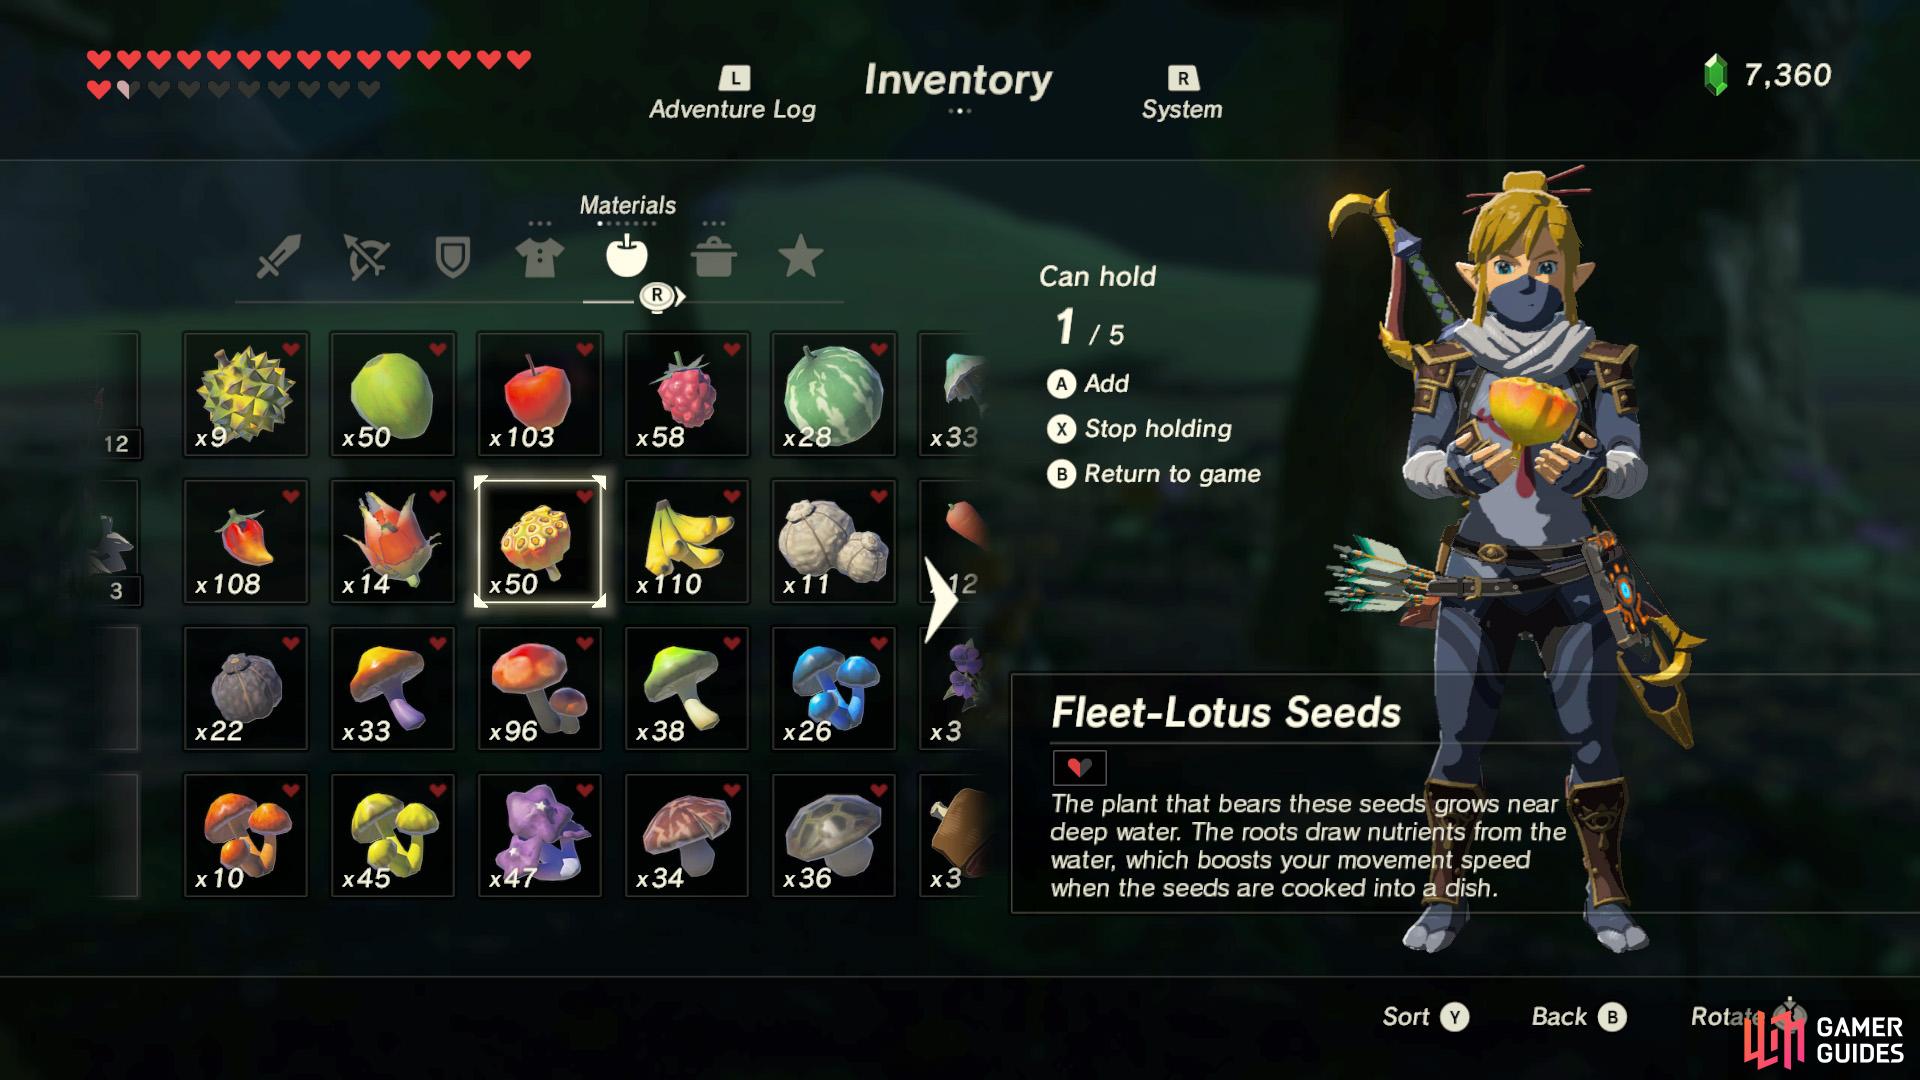 Cooking Fleet-Lotus Seeds can increase your movement speed.